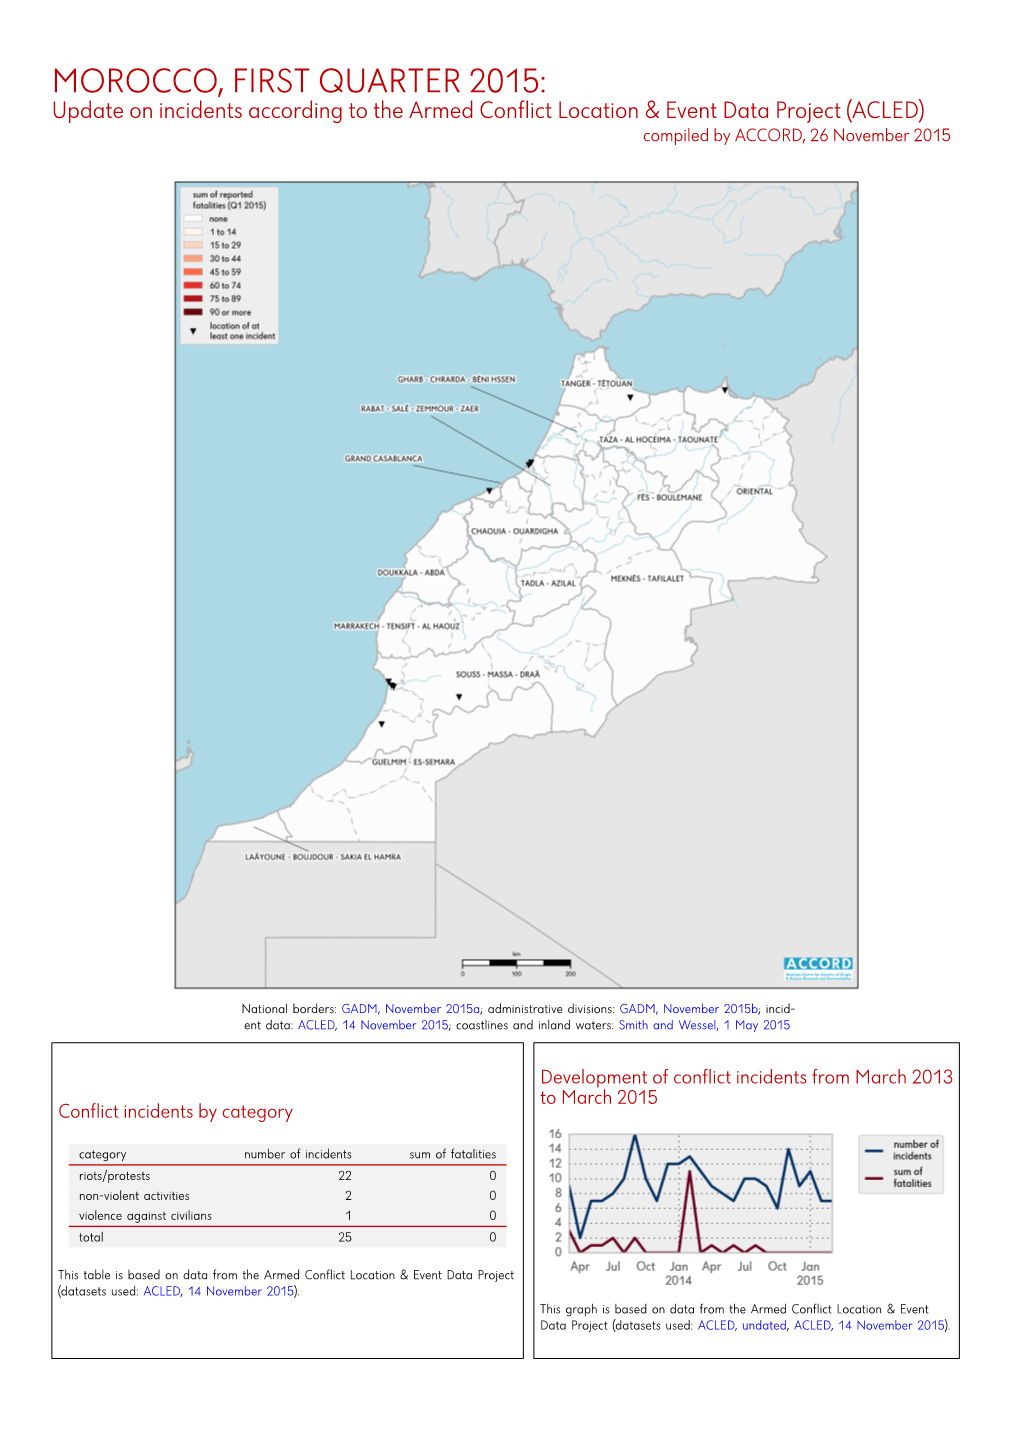 MOROCCO, FIRST QUARTER 2015: Update on Incidents According to the Armed Conflict Location & Event Data Project (ACLED) Compiled by ACCORD, 26 November 2015